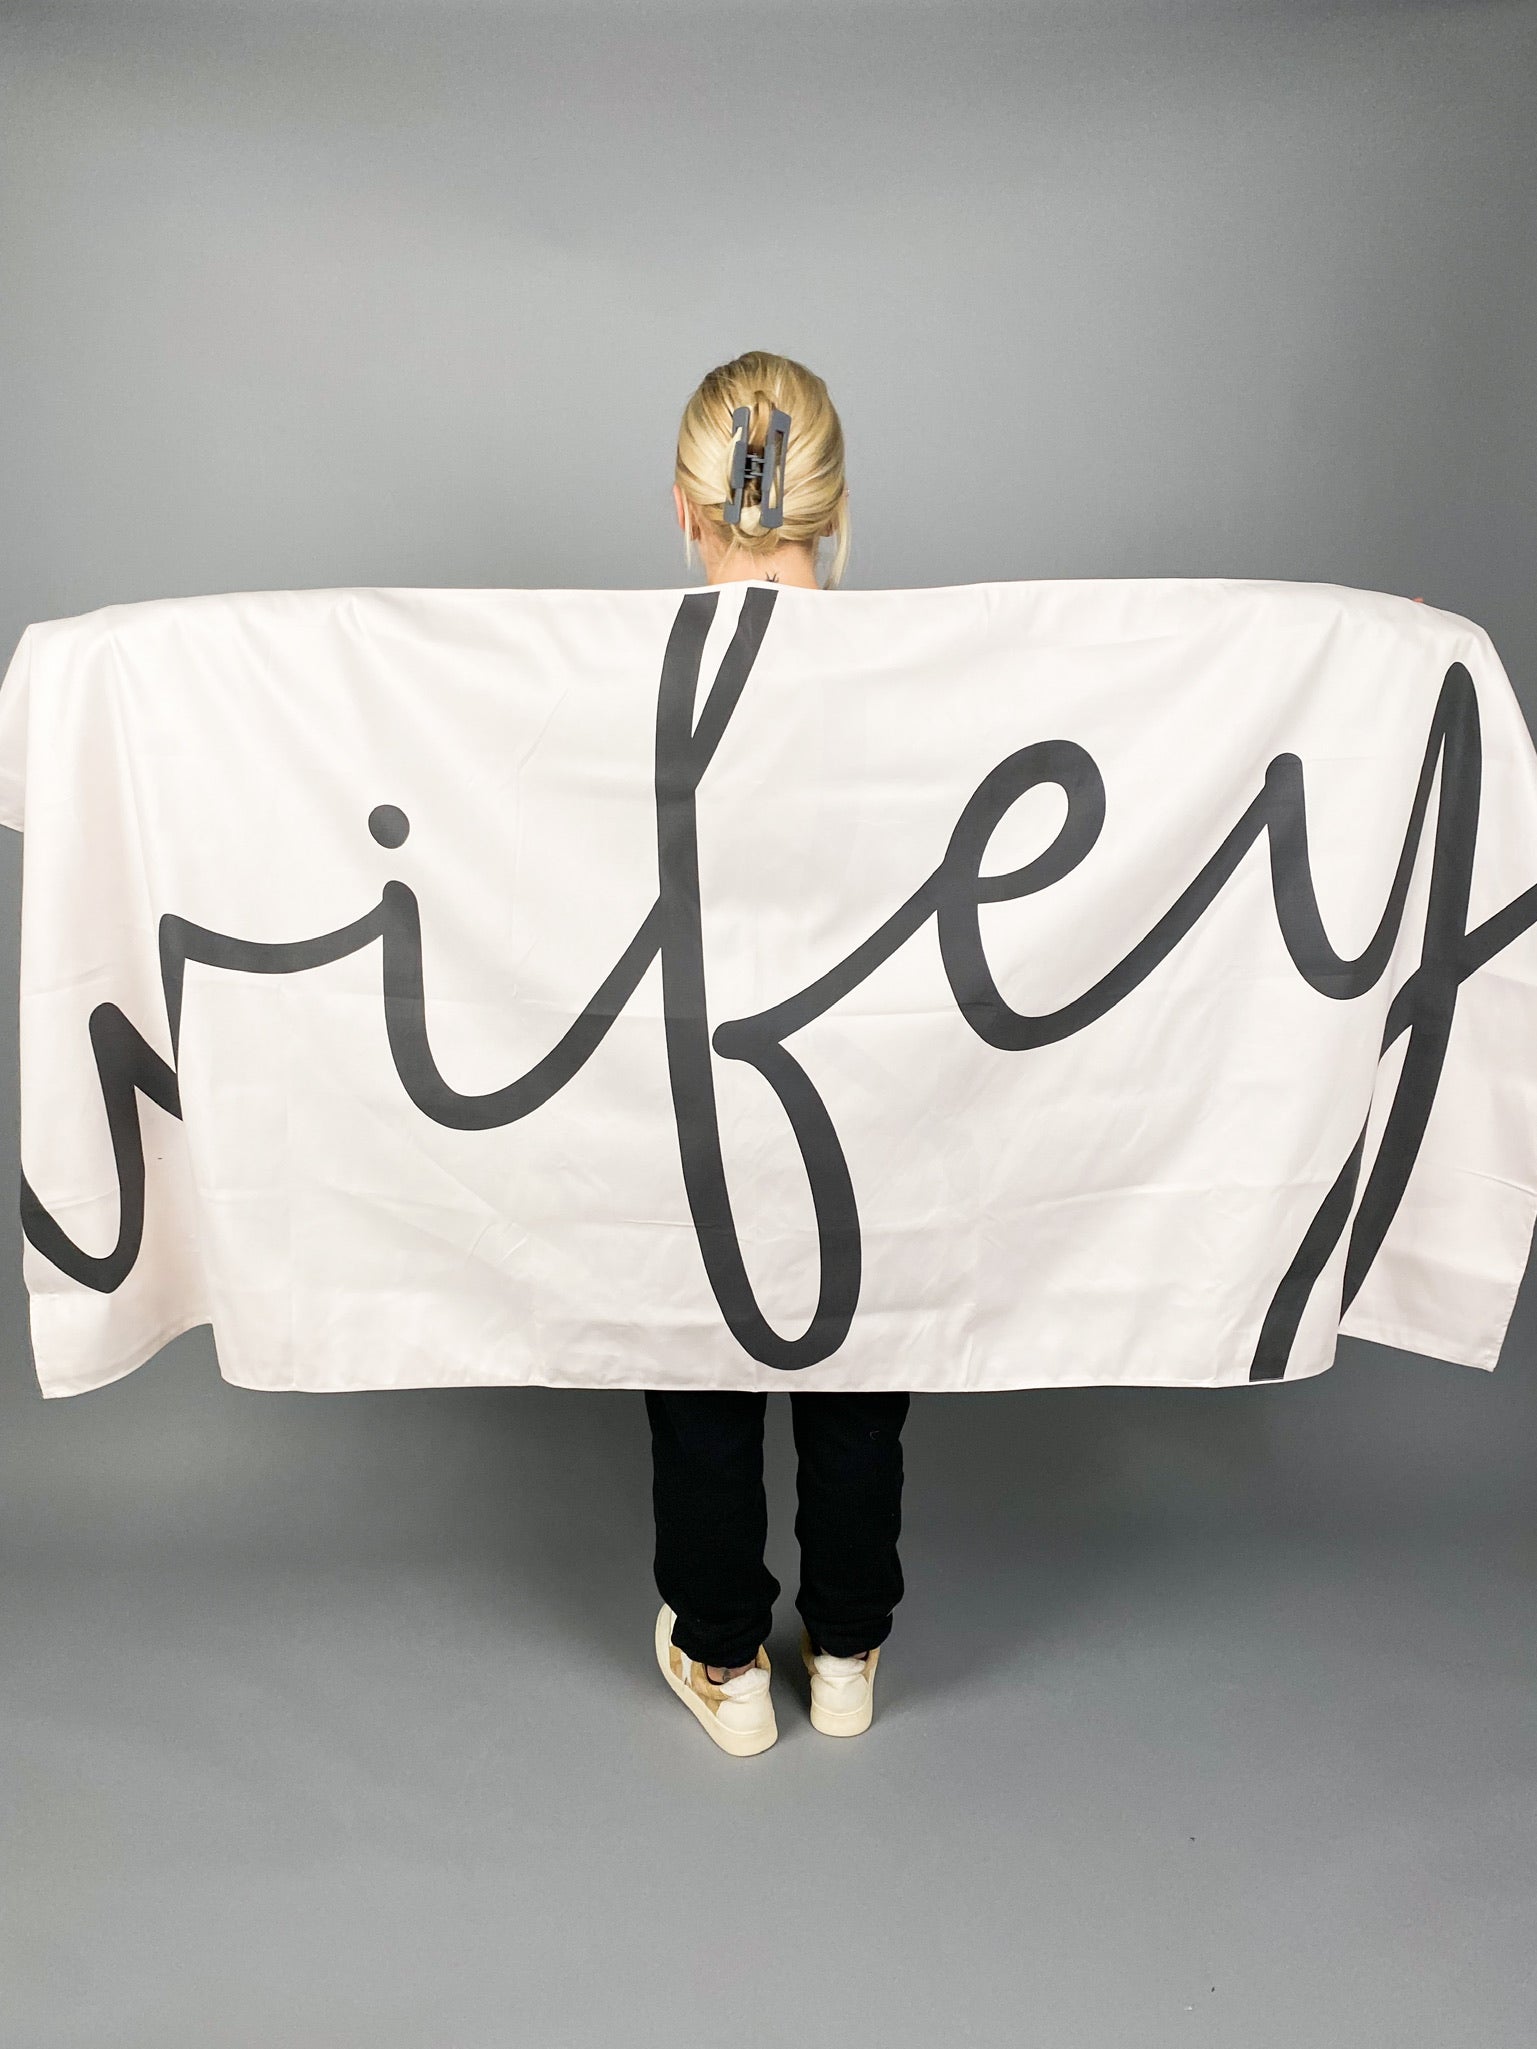 Wifey quick dry oversized beach towel light pink - Stylish Beach Towels -  Cute Bridal Collection at Lush Fashion Lounge Boutique in Oklahoma City